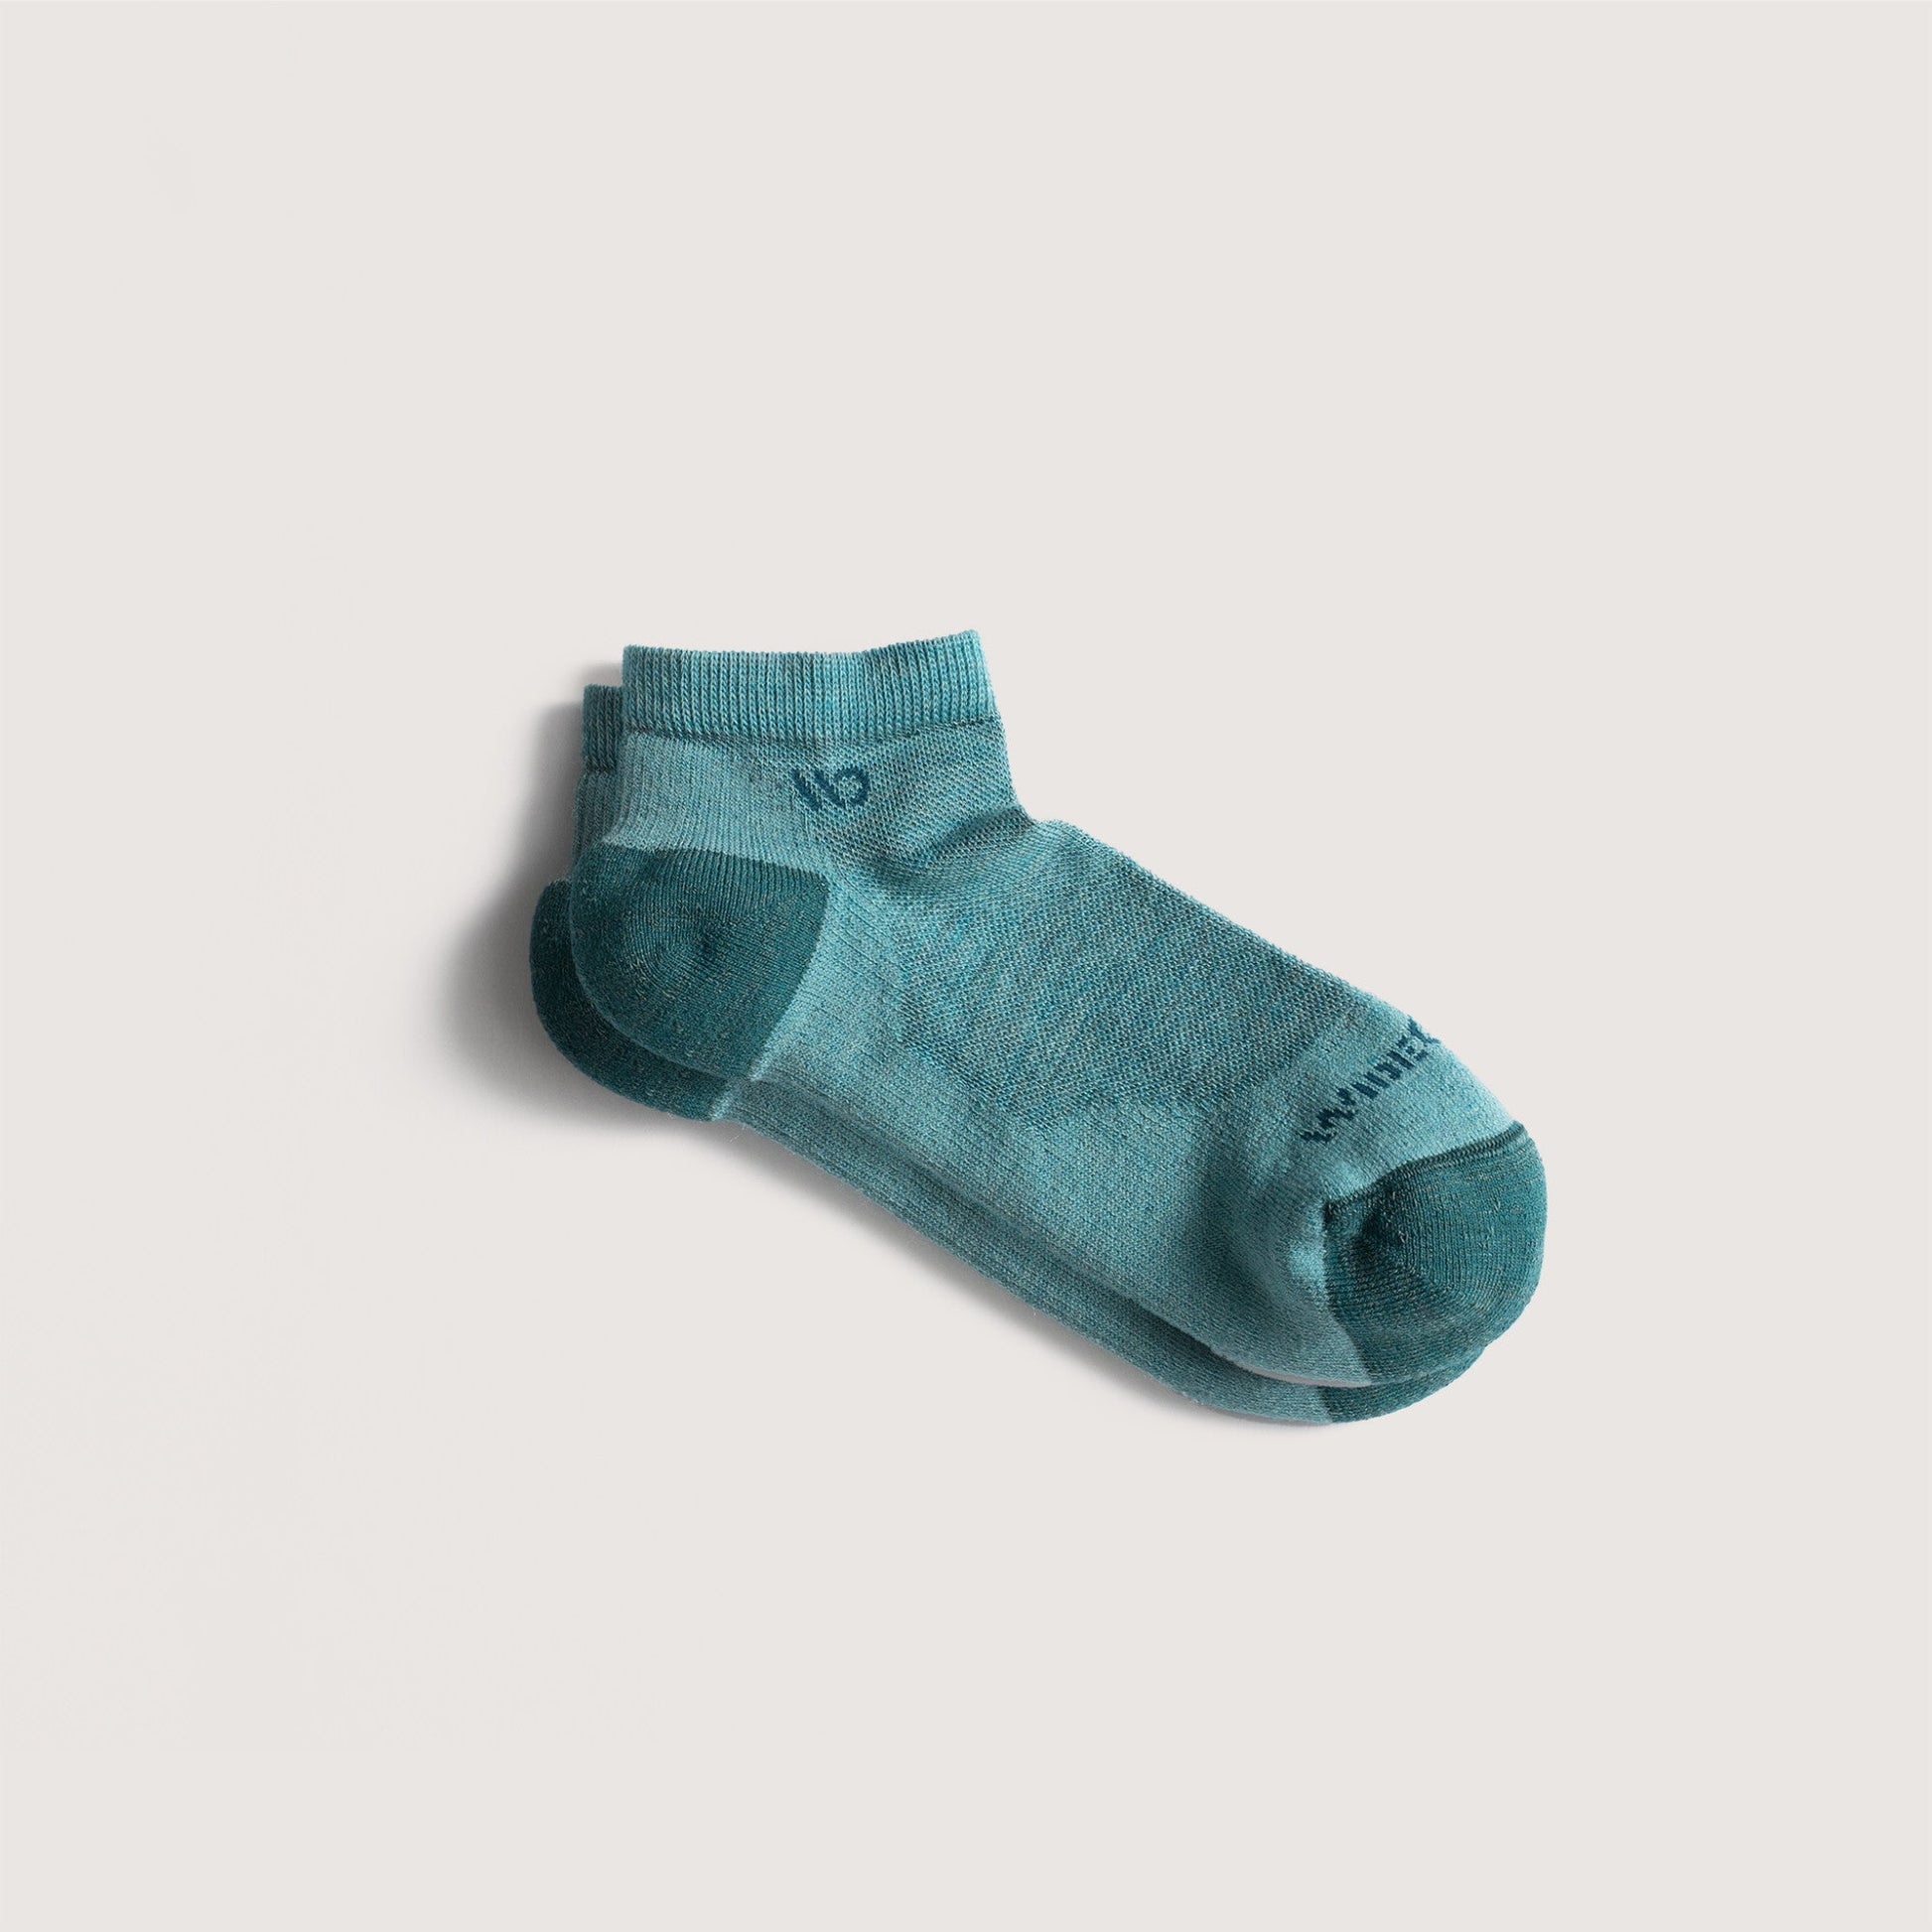 Flat socks featuring teal heel/toe and logo, with light teal body --Light Teal/Denim/Taupe